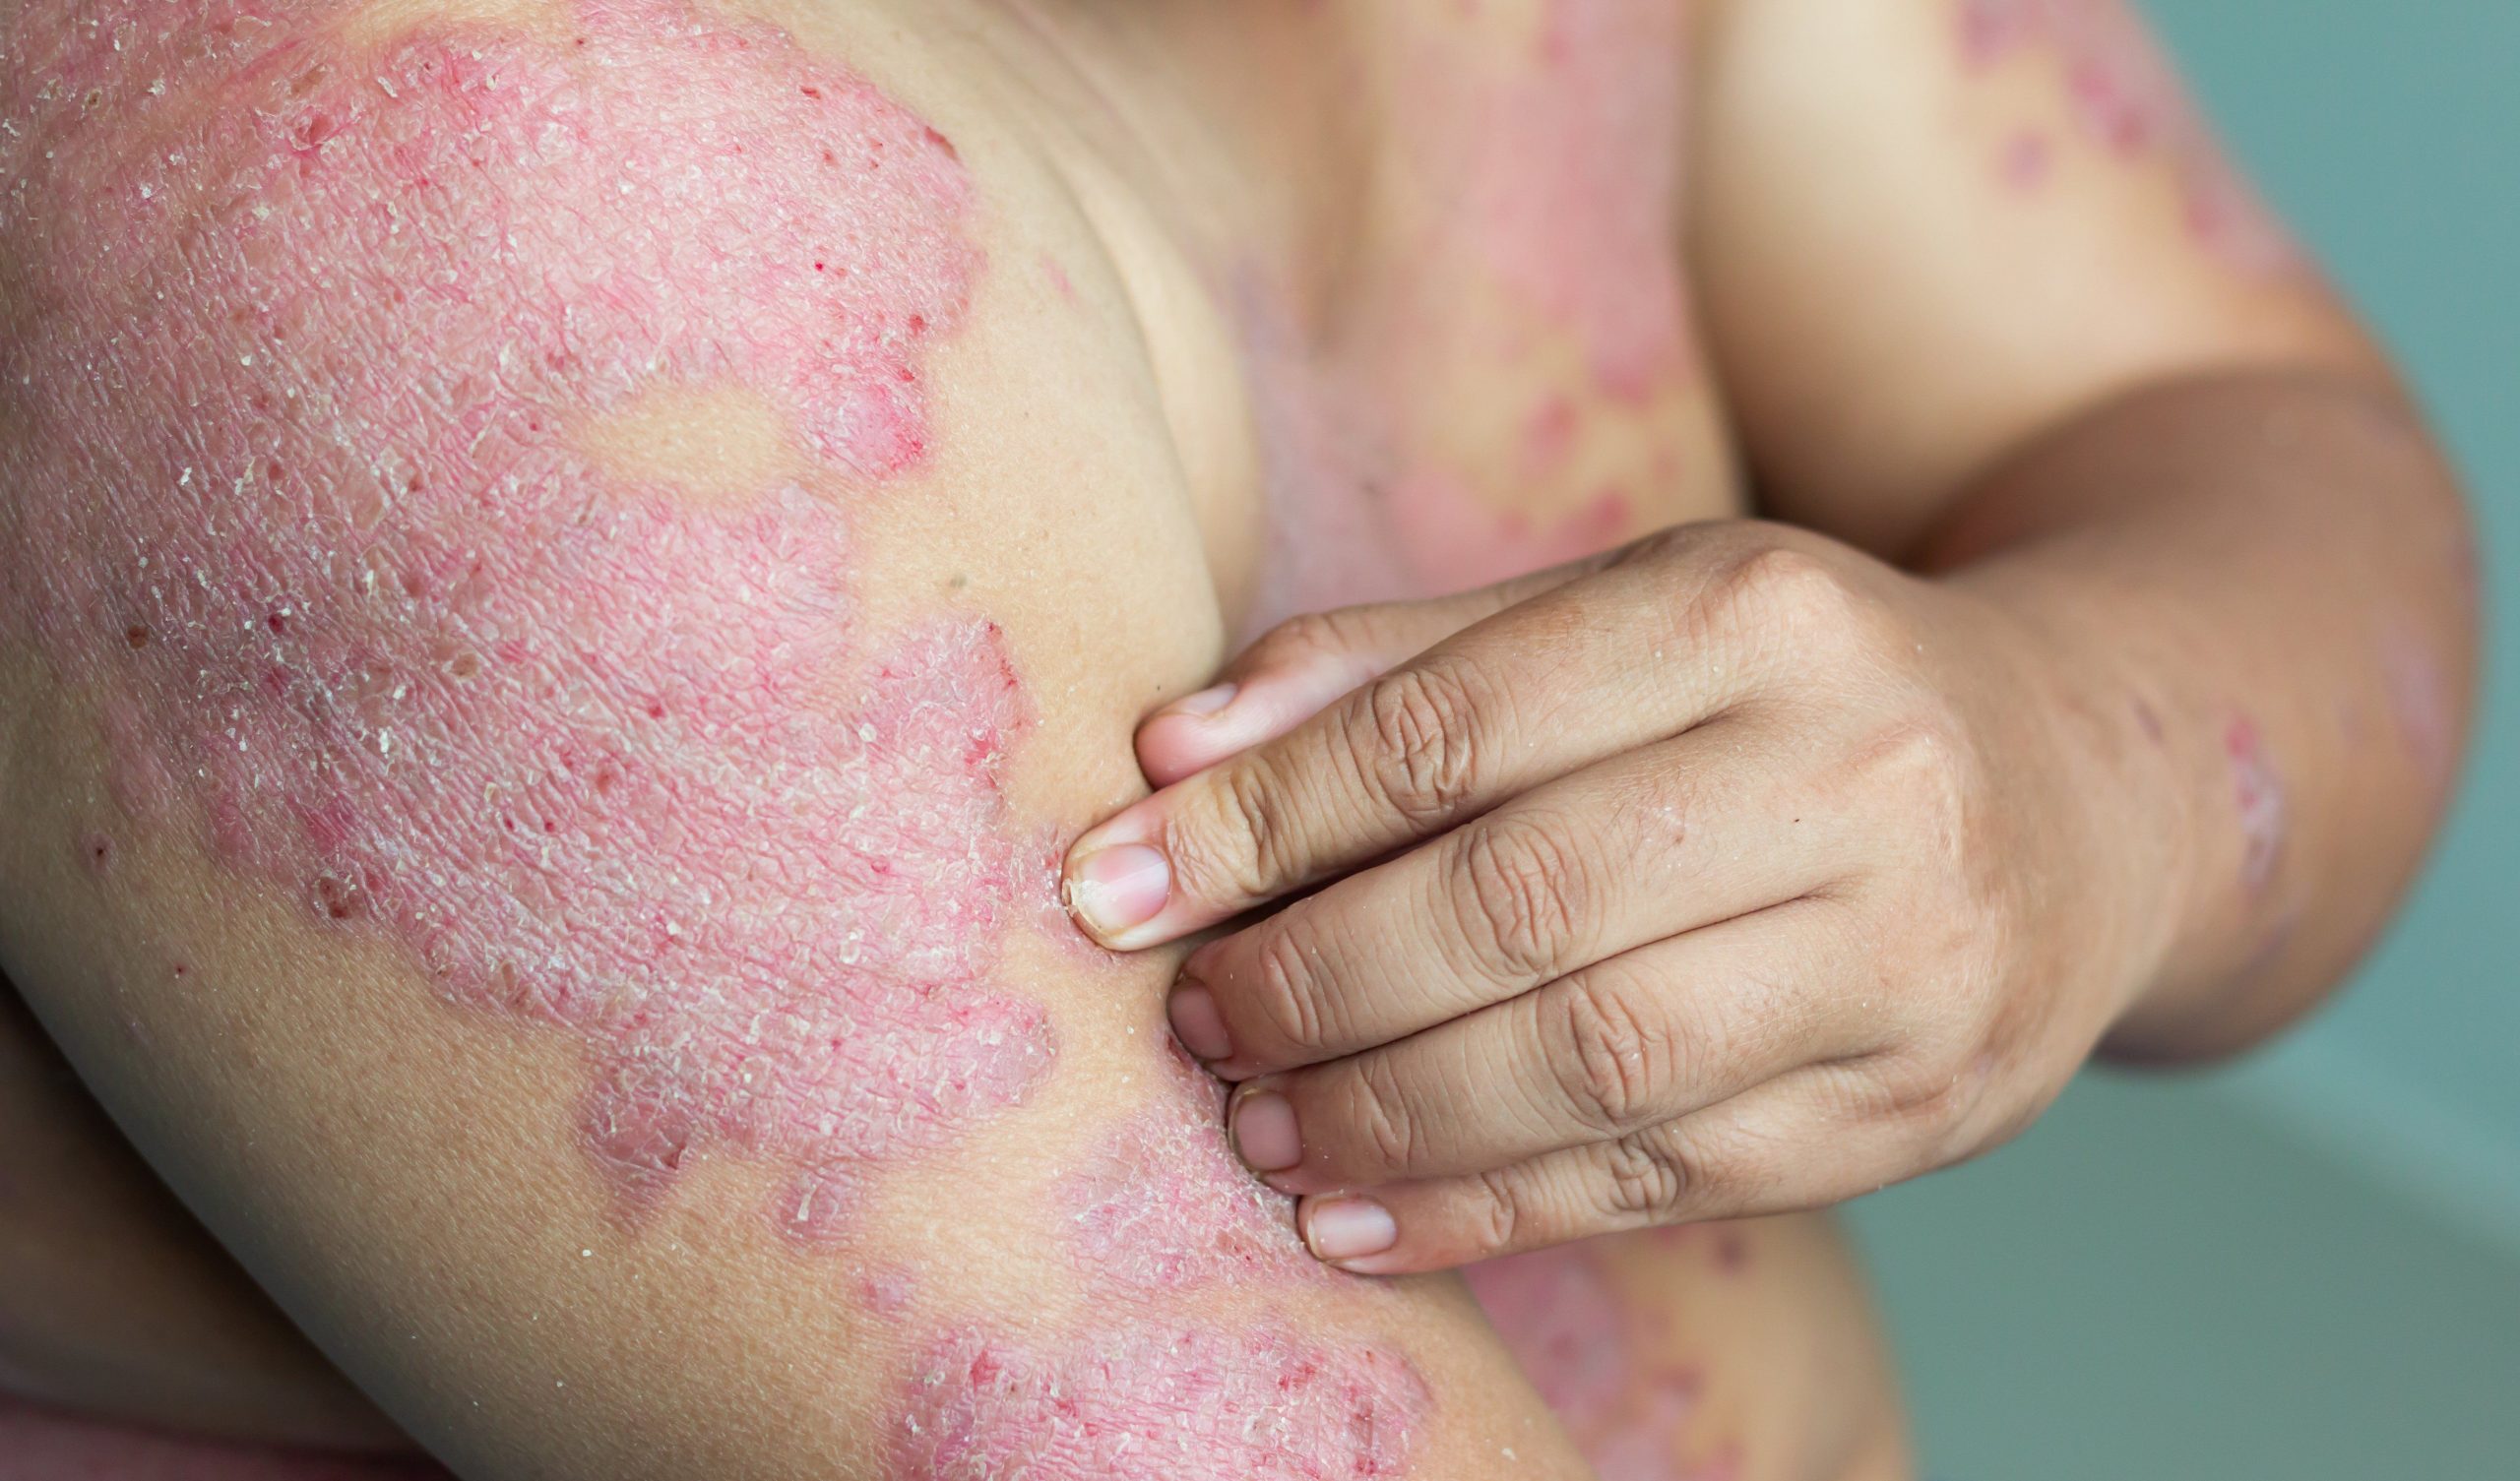 Patients with psoriasis may not live as long